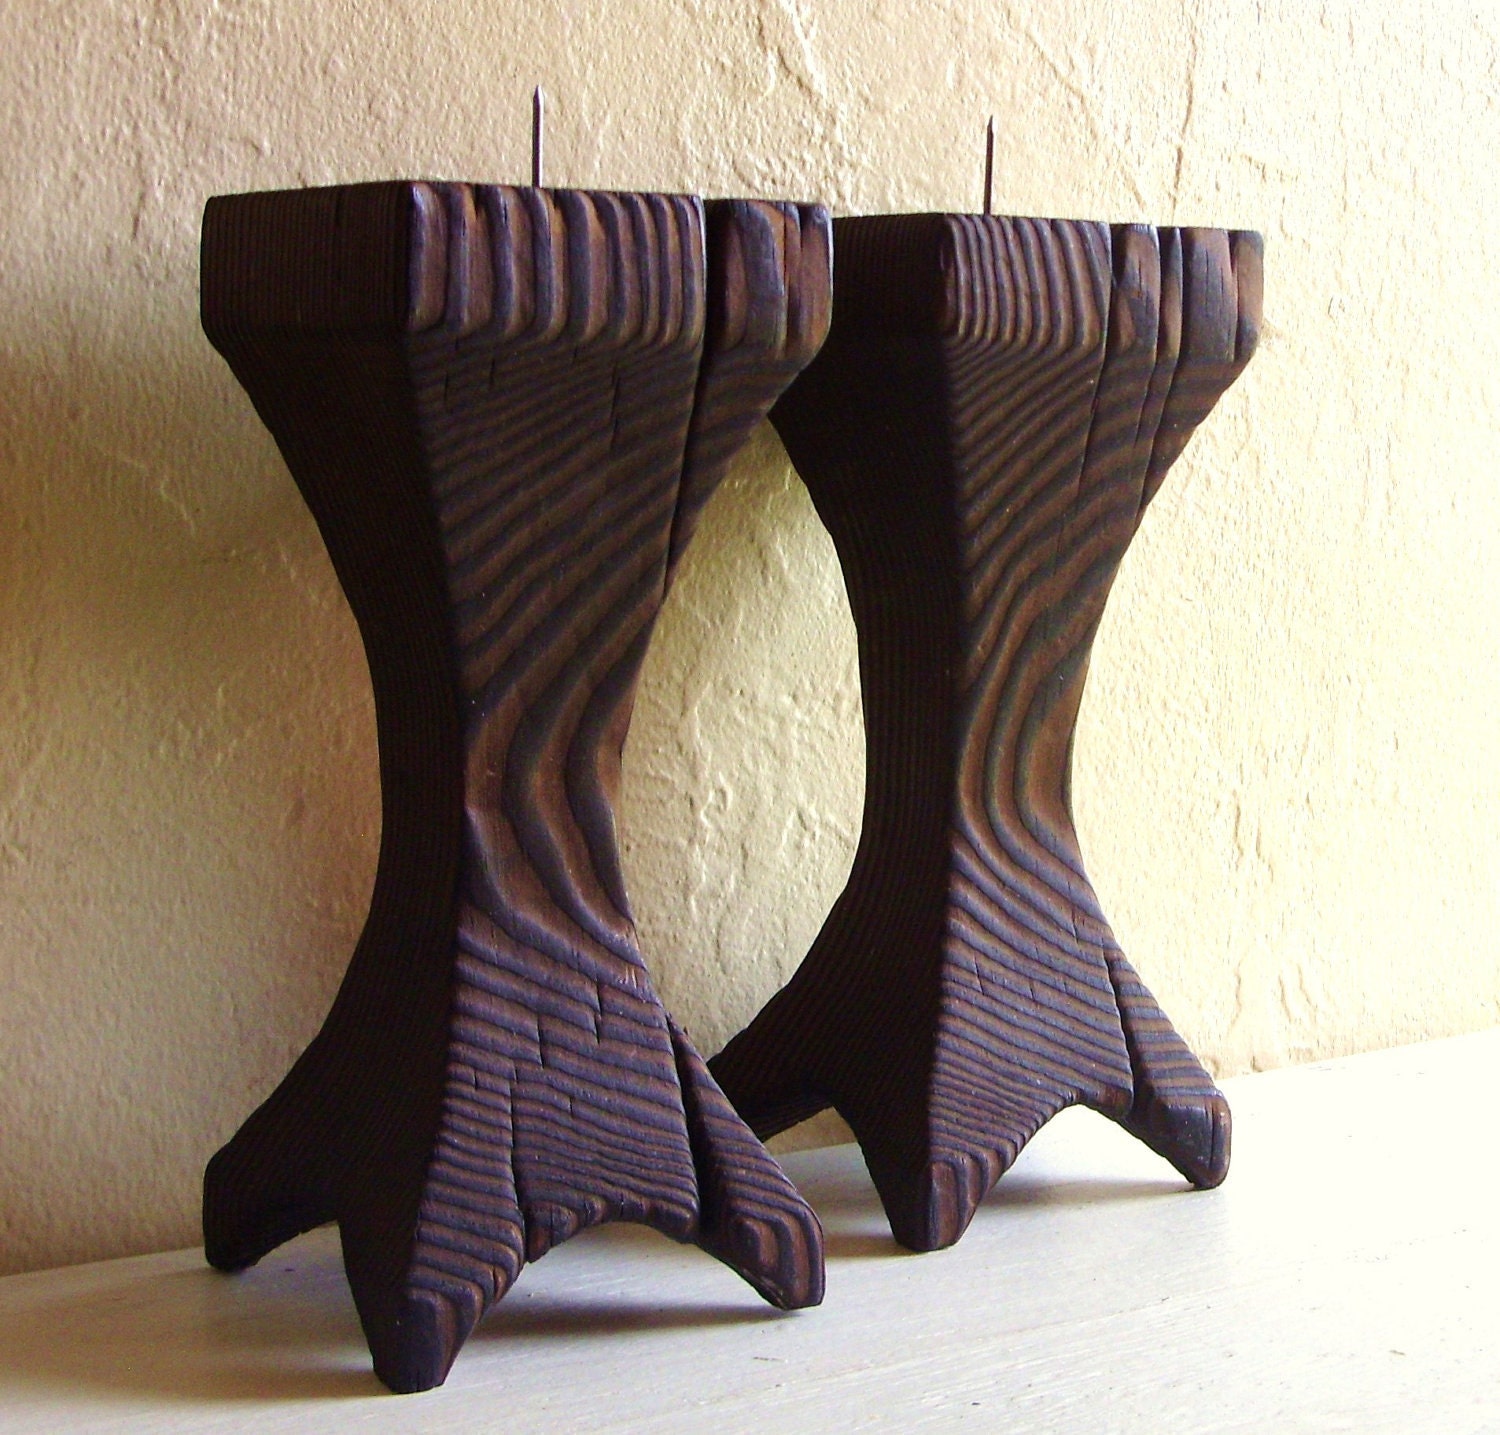 Primitive Candle Holders Wooden